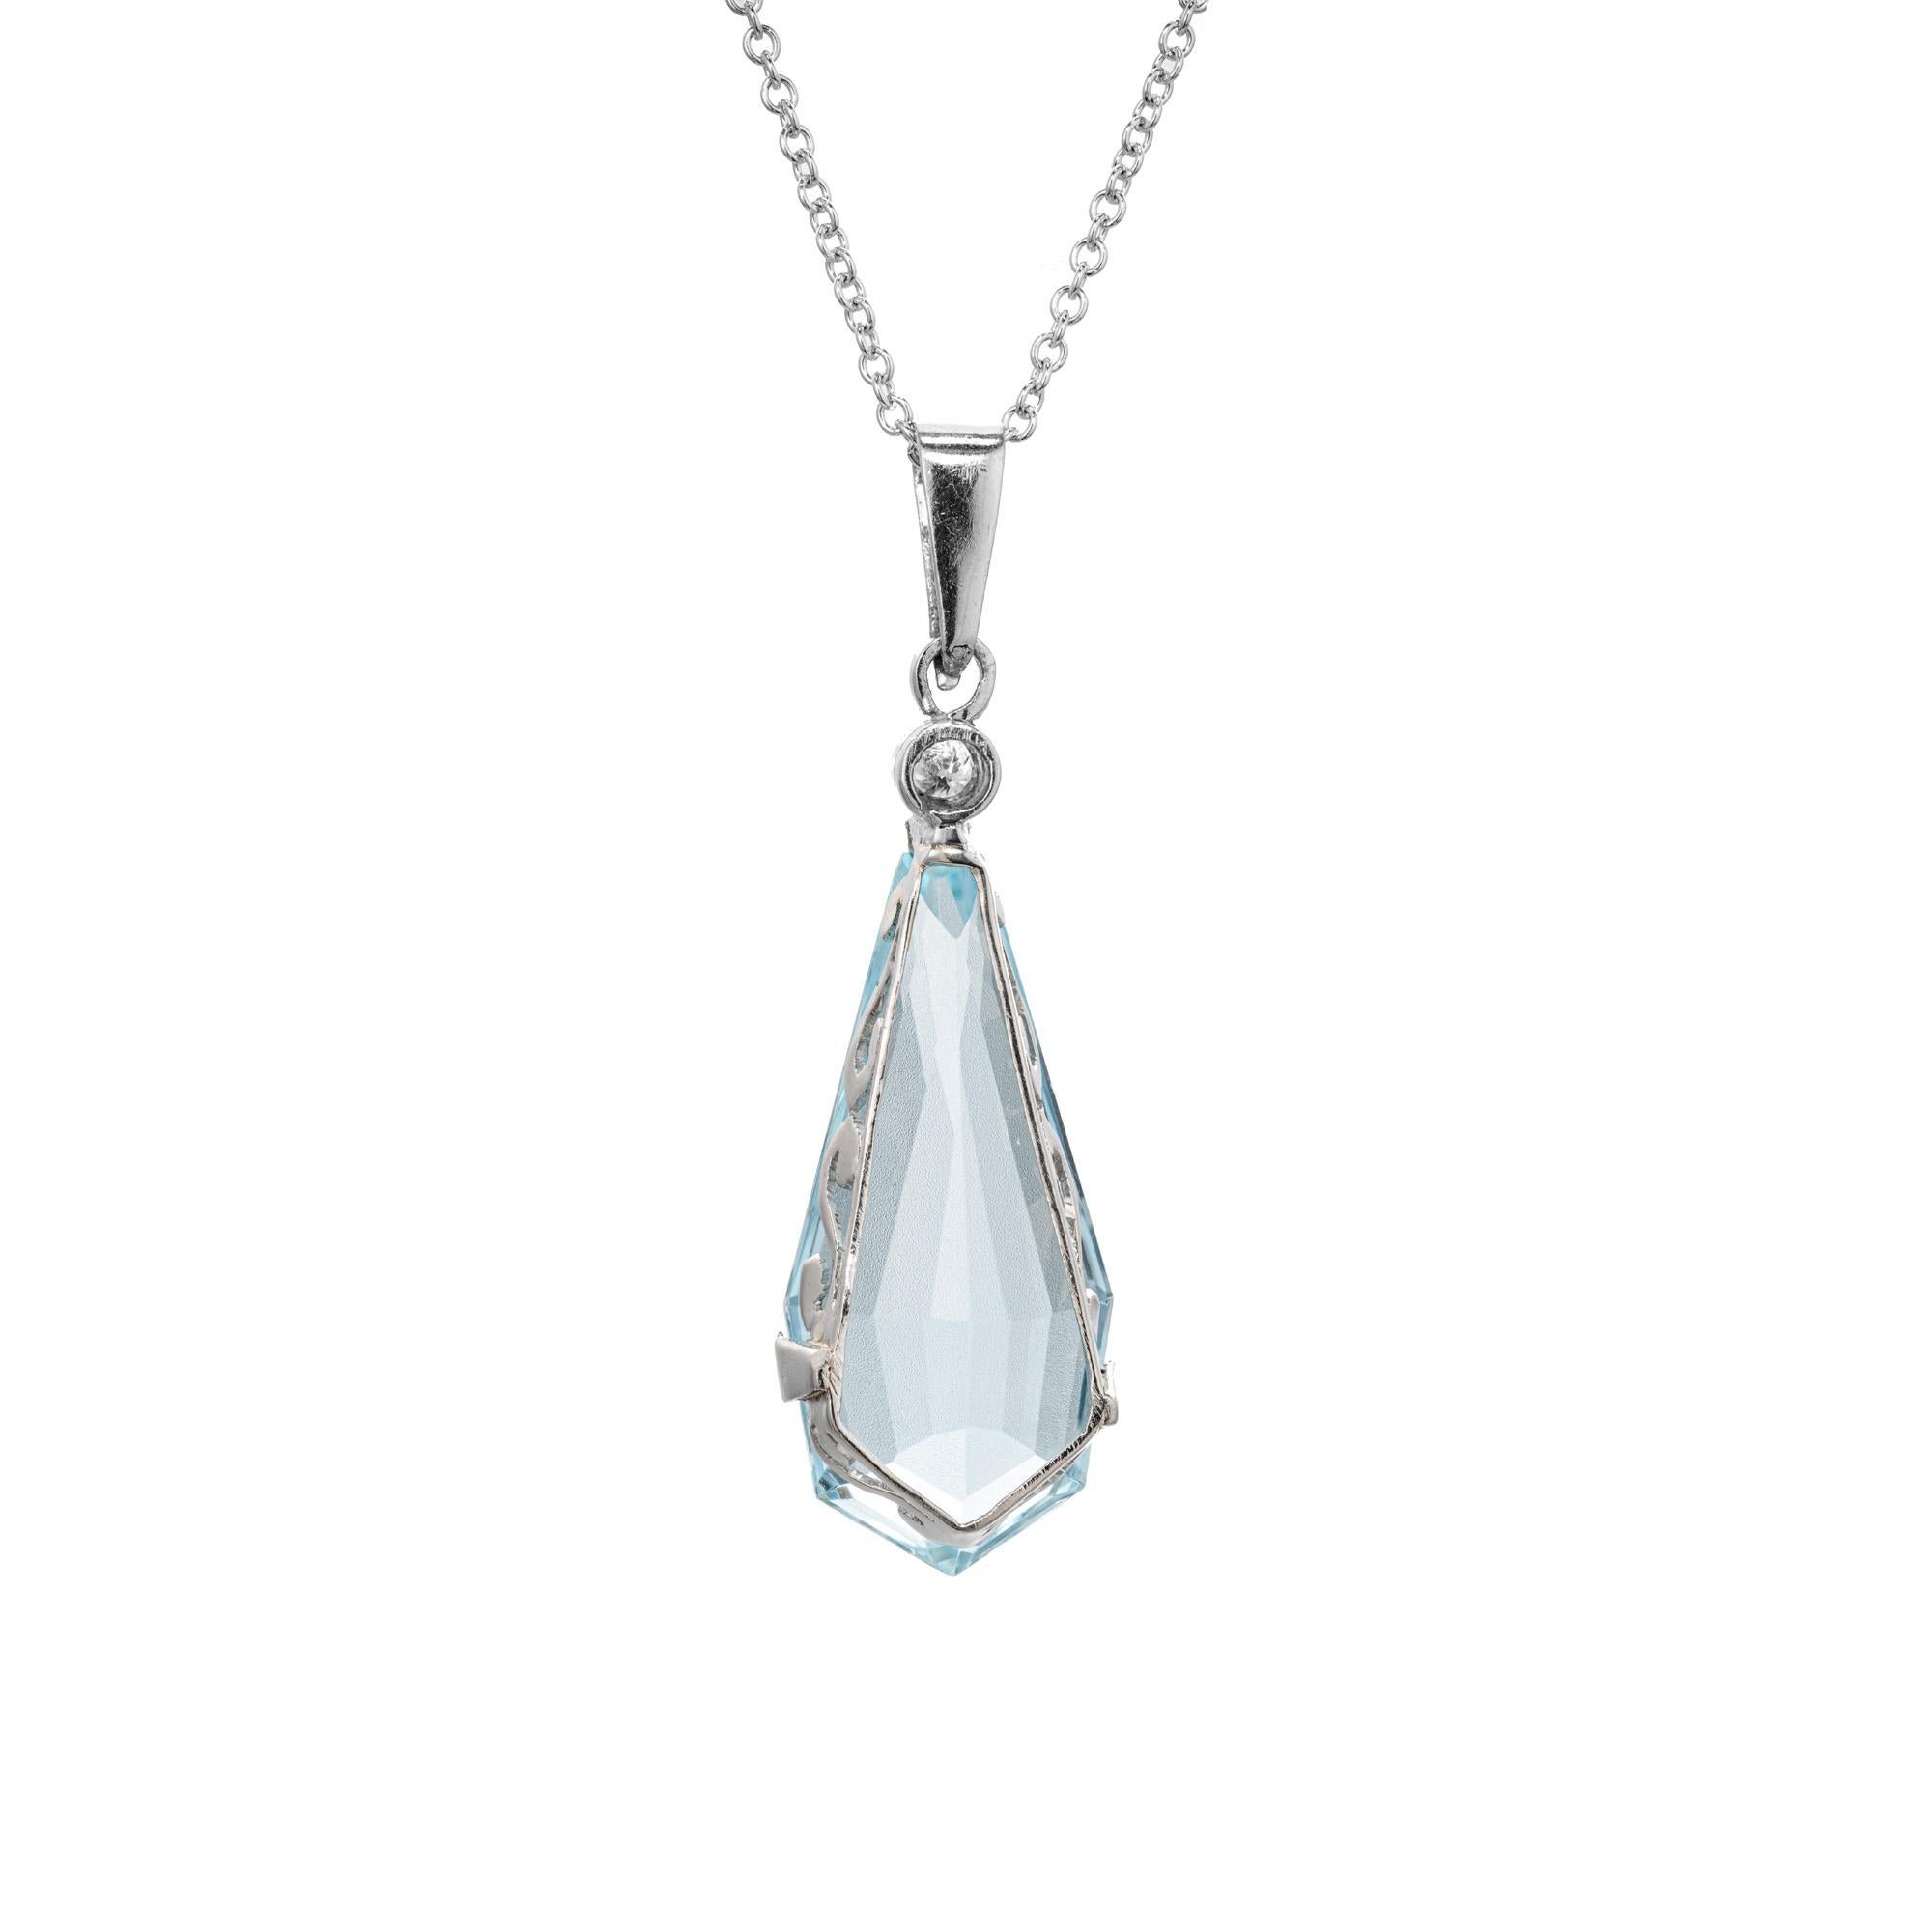 1940's Bright aquamarine and diamond pendant necklace. 6.75ct kite shaped aqua set in a 14k white gold setting with a round cut diamond accent. 18 inch 14k white gold chain. 

1 kite shaped blue aqua, approx. 6.75cts
1 round diamond, I-J SI approx.